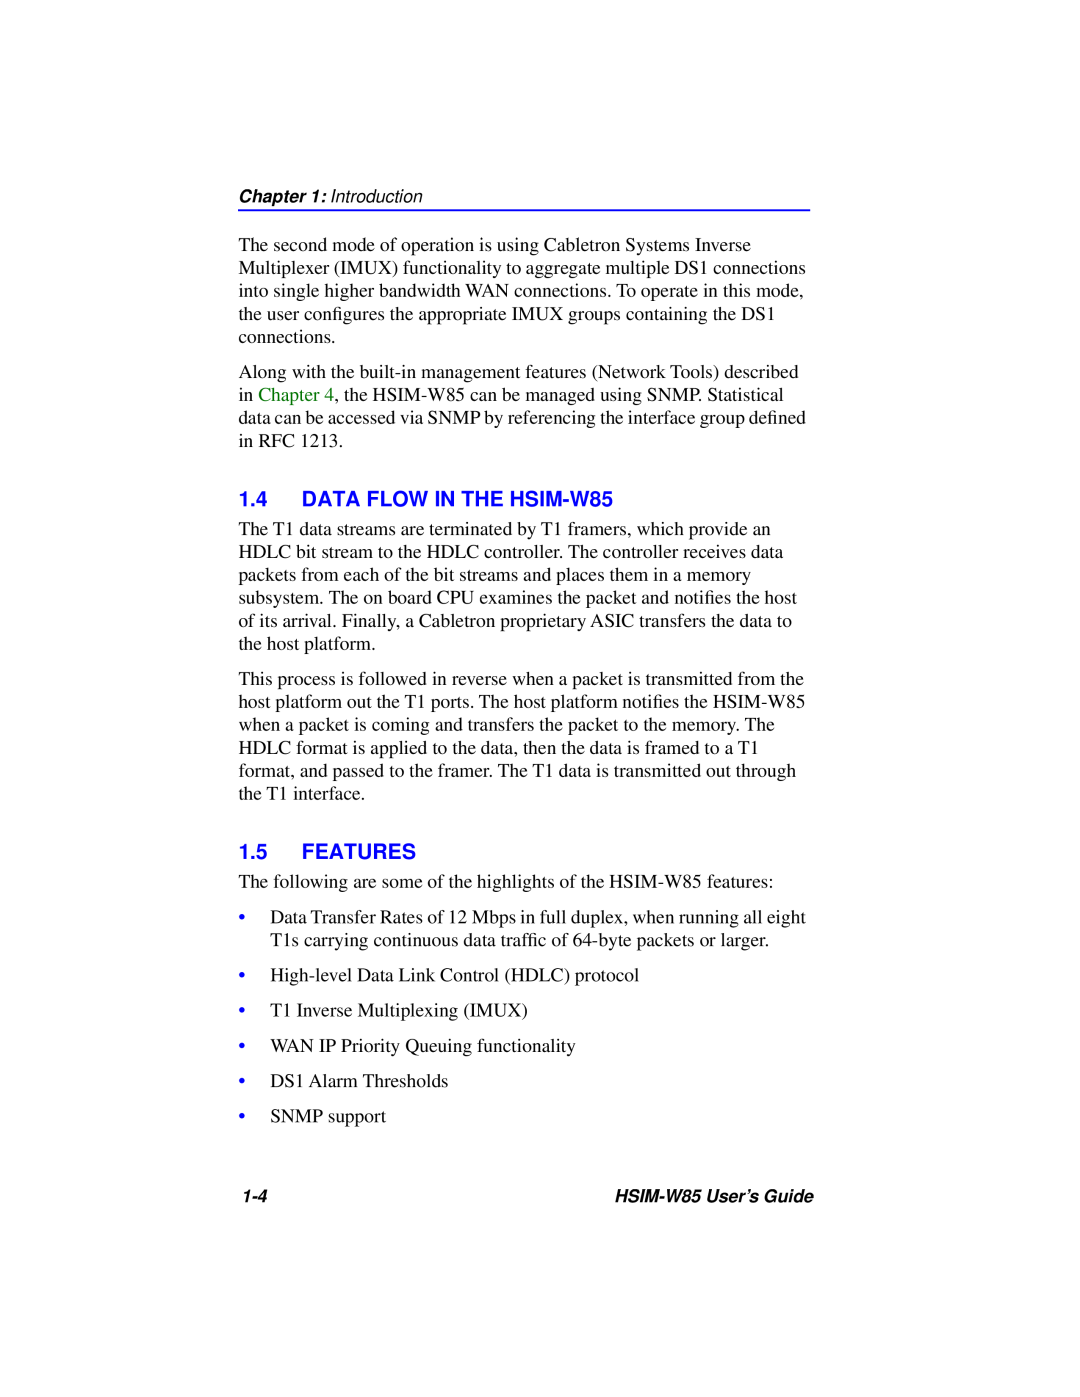 Cabletron Systems manual DATA FLOW IN THE HSIM-W85, Features 